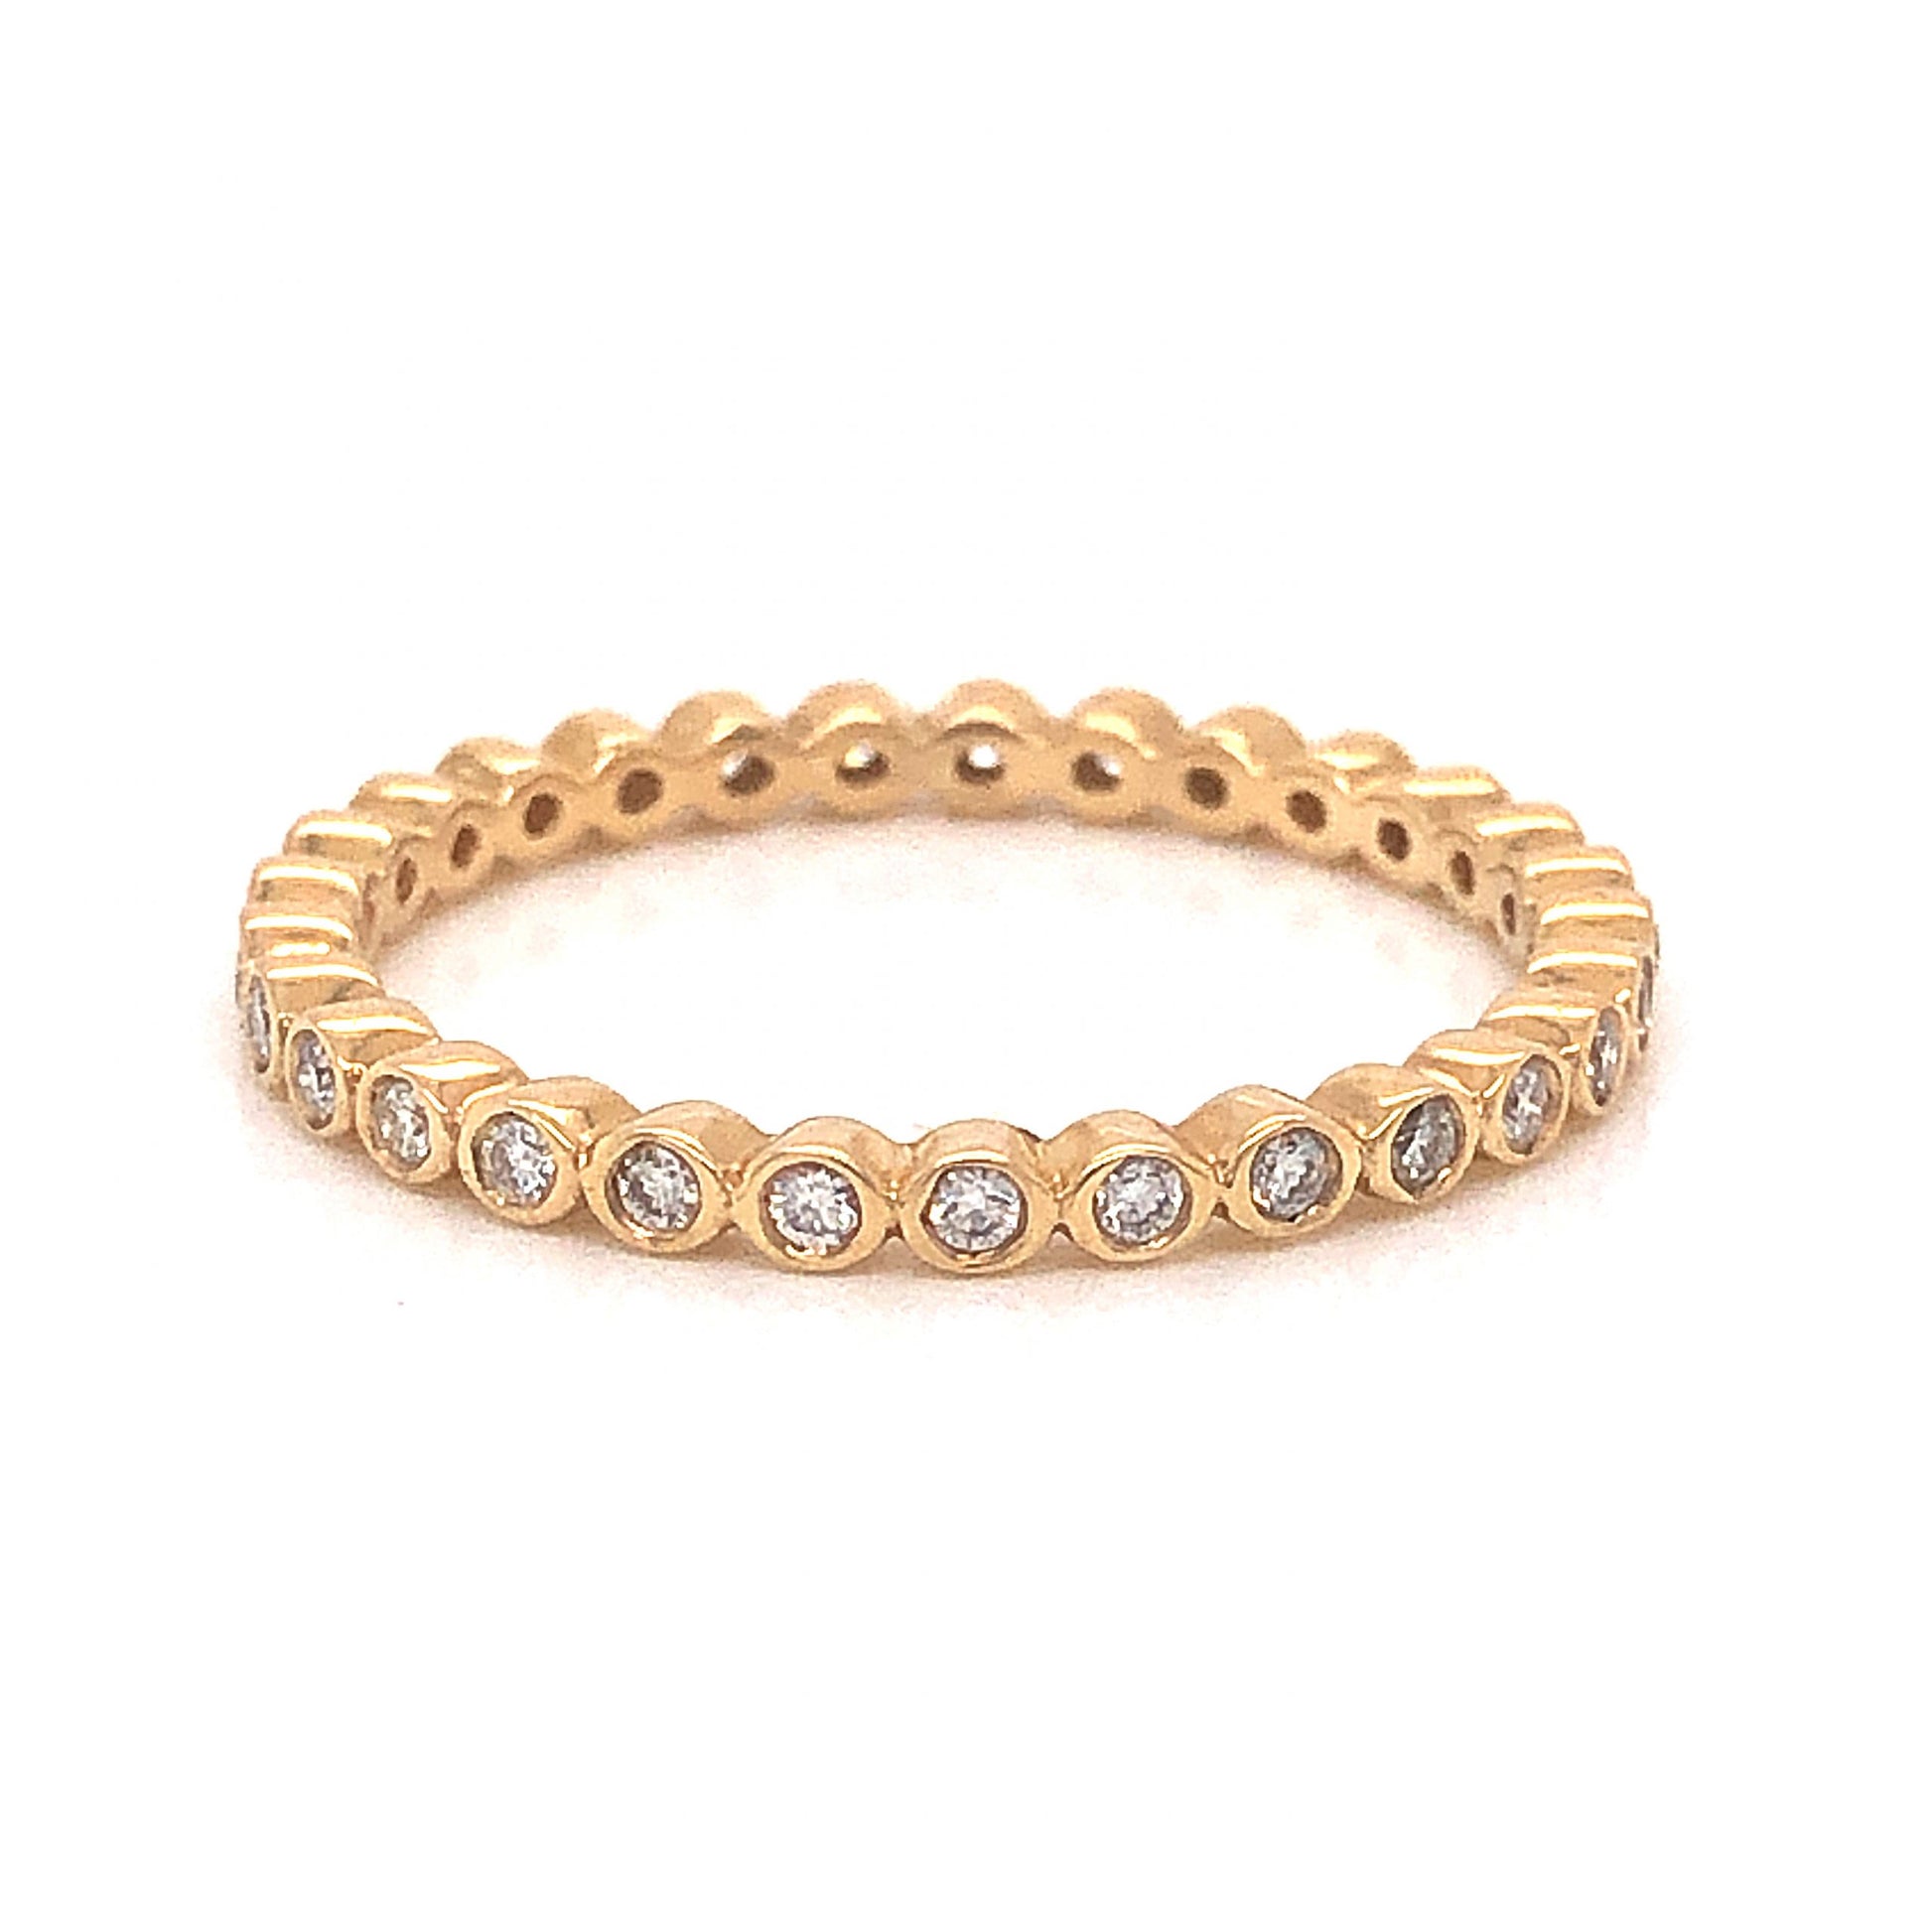 Bezel Set Eternity Diamond Band in 14k Yellow GoldComposition: 14 Karat Yellow Gold Ring Size: 6.5 Total Diamond Weight: .32ct Total Gram Weight: 1.6 g Inscription: 14k .32 ct
      